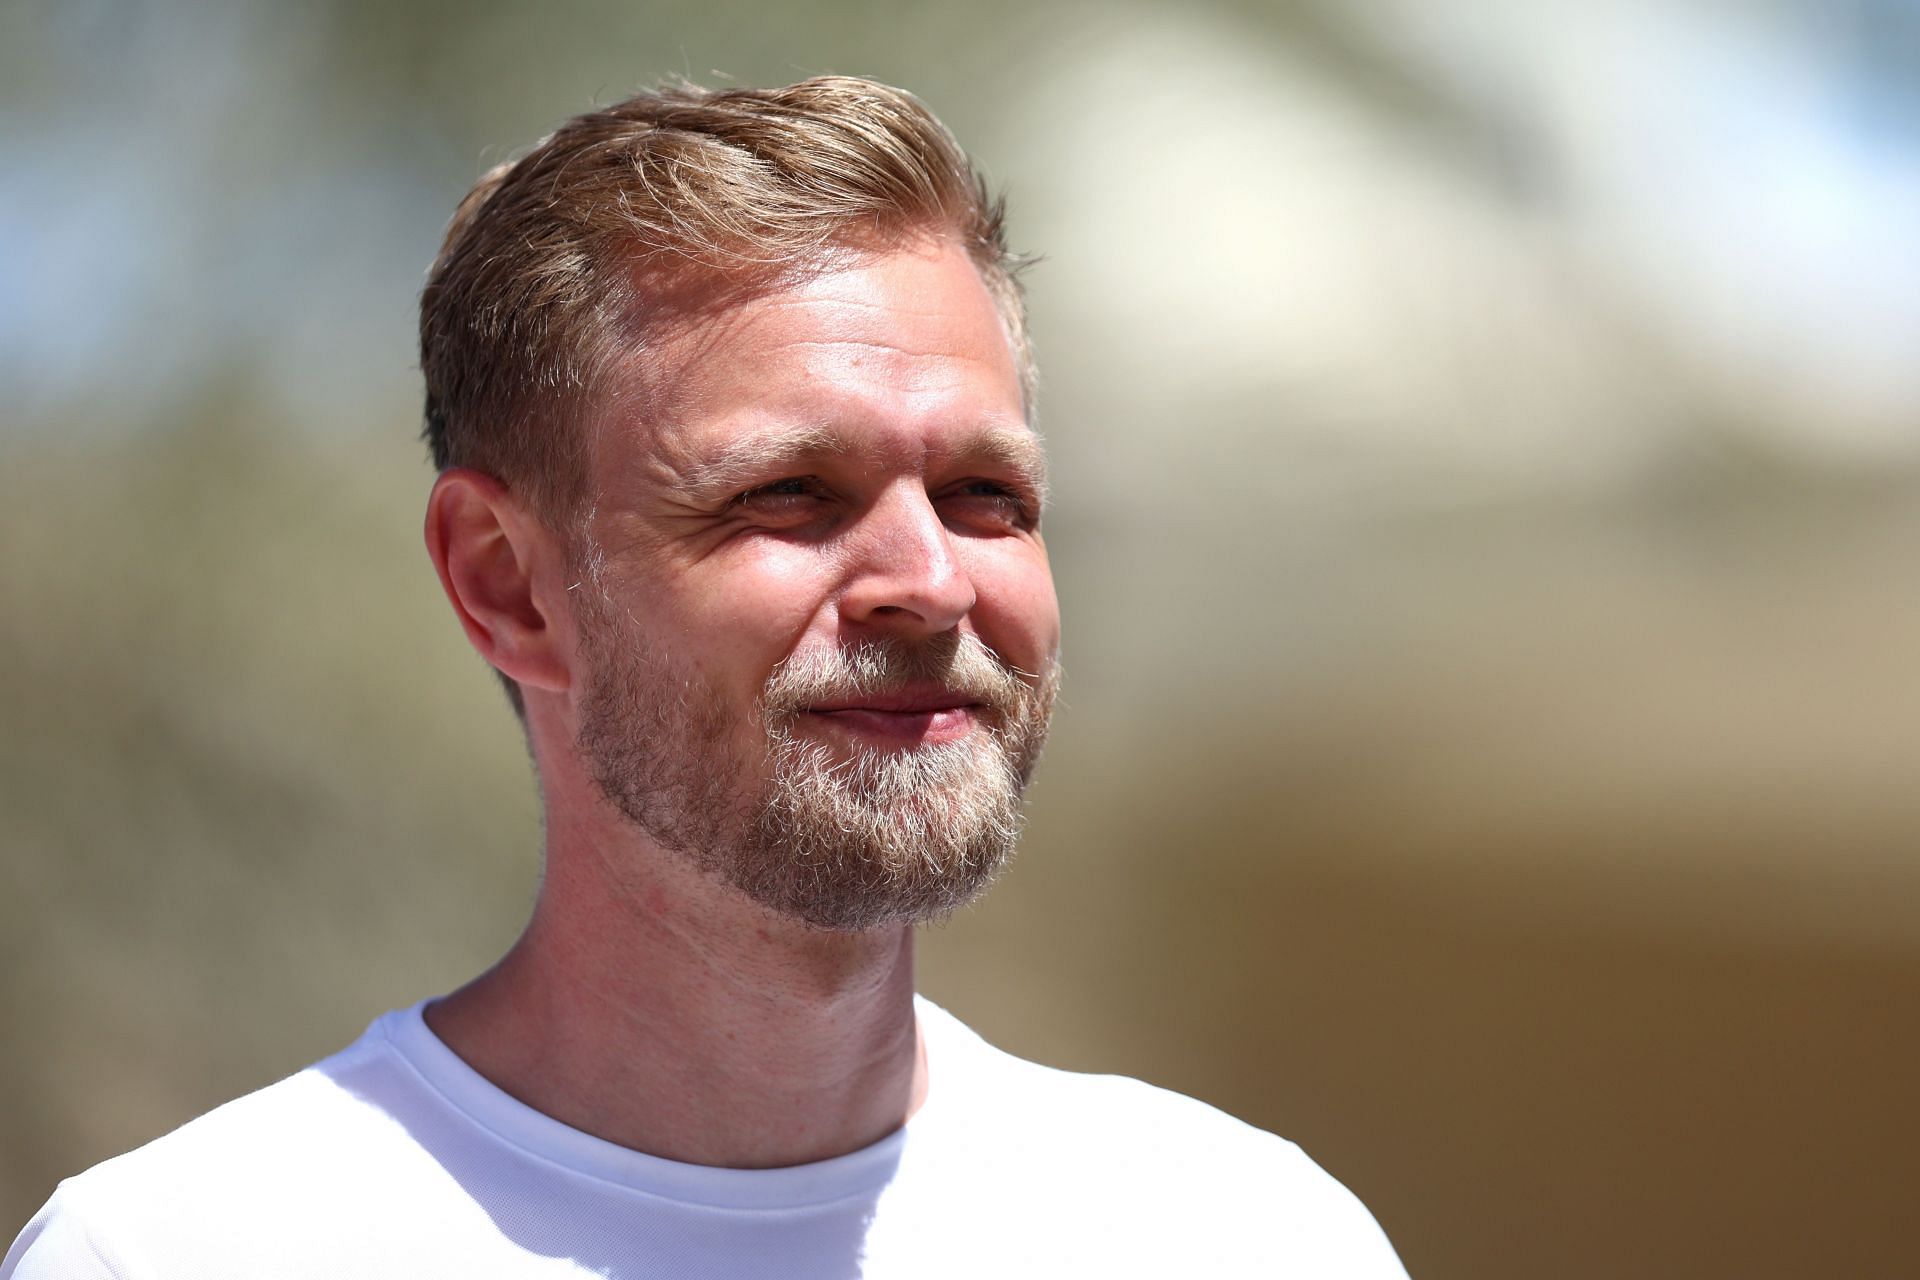 Kevin Magnussen looks on in the Paddock before practice ahead of the 2022 Bahrain GP (Photo by Lars Baron/Getty Images)